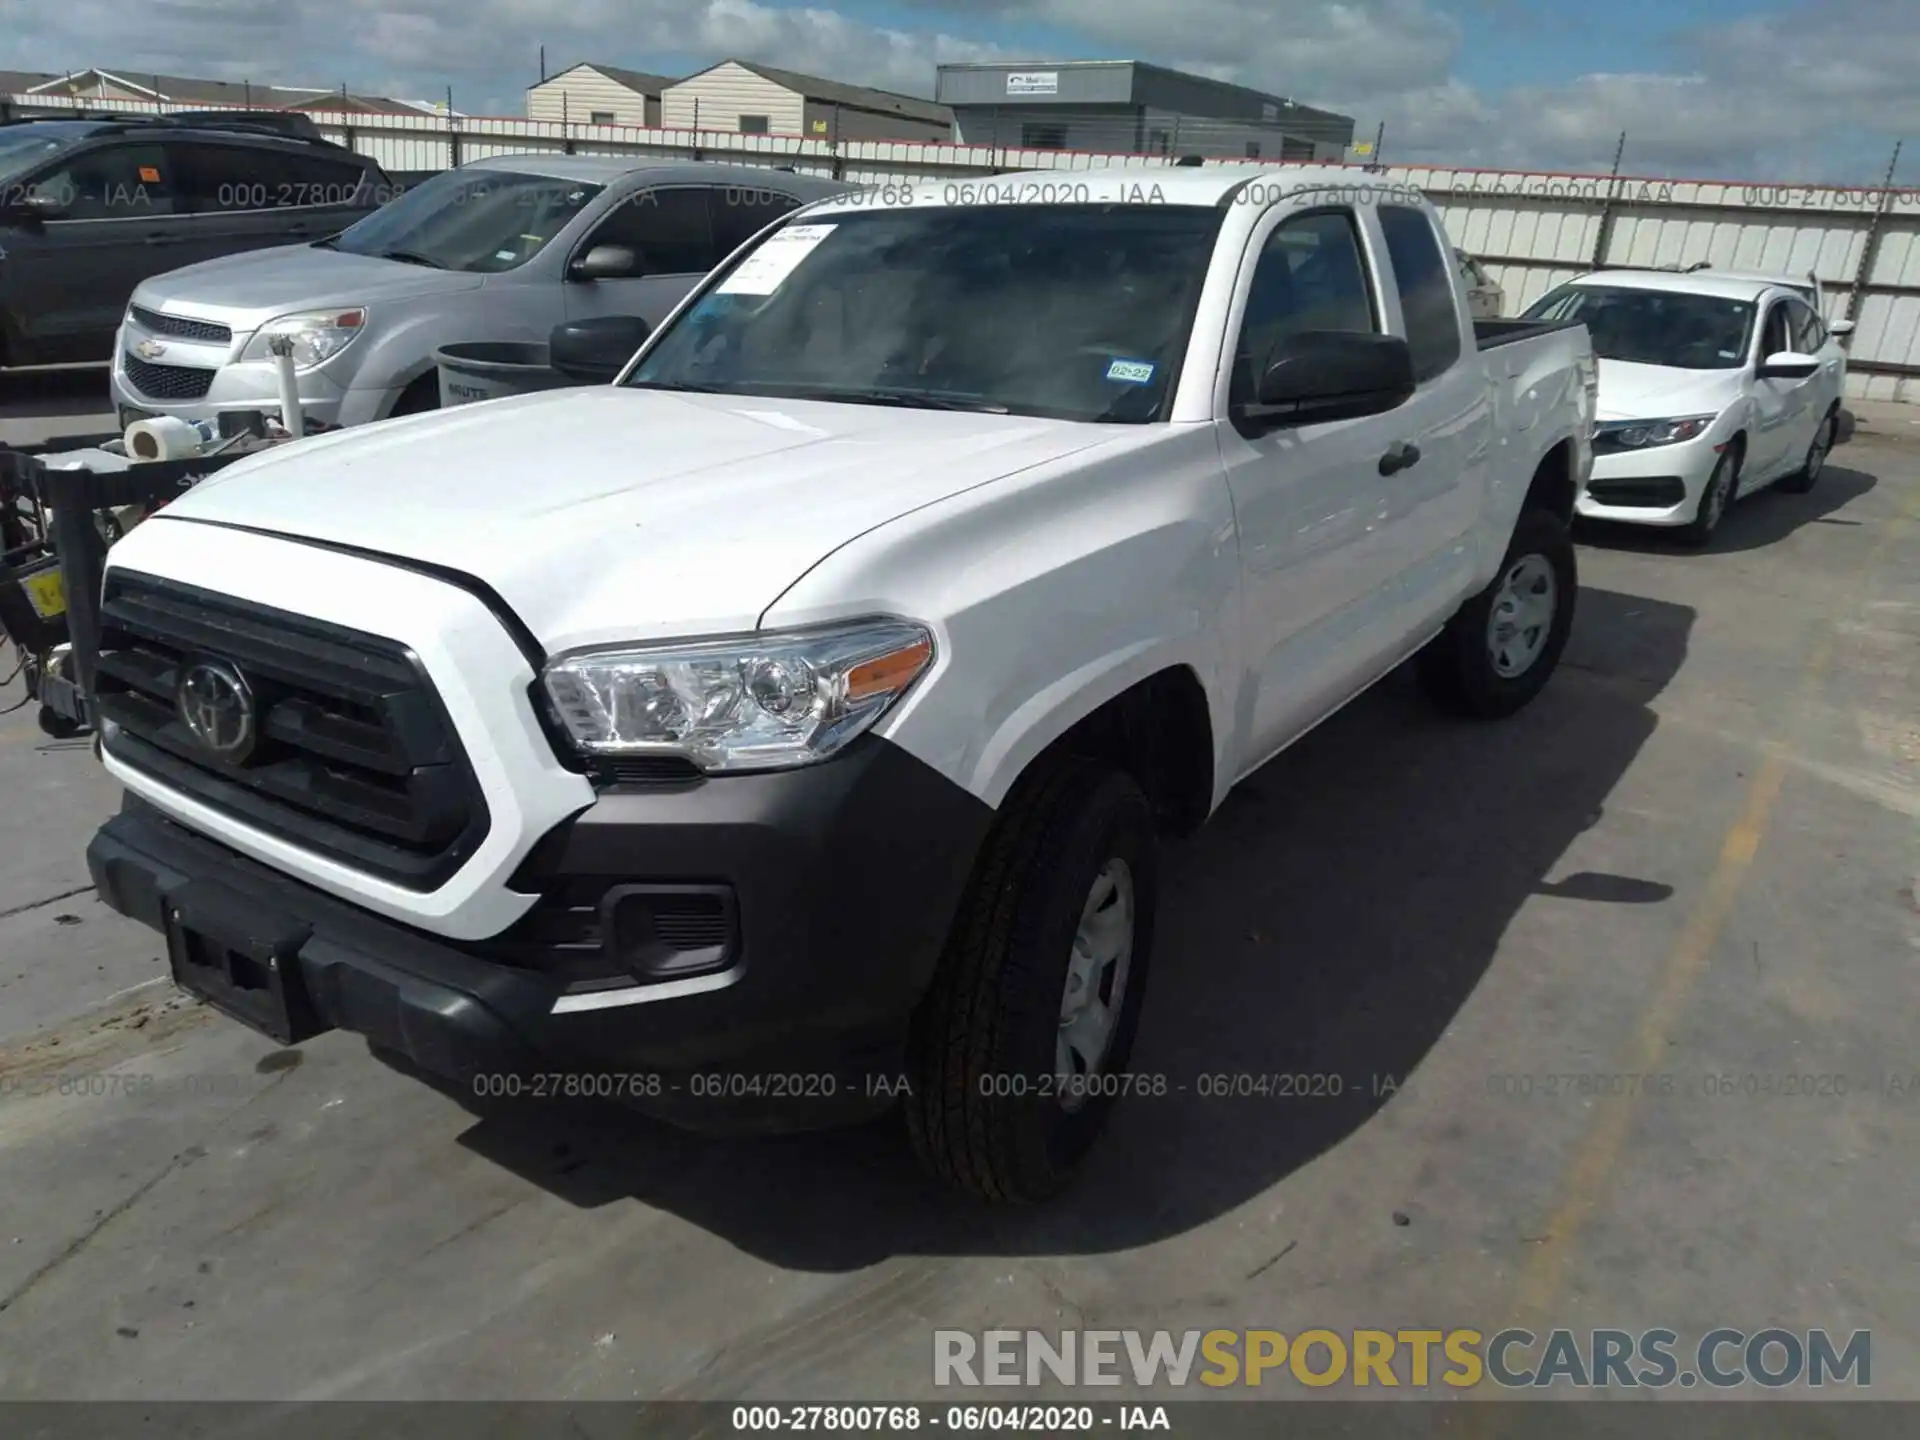 2 Photograph of a damaged car 5TFRX5GN9LX178146 TOYOTA TACOMA 2WD 2020